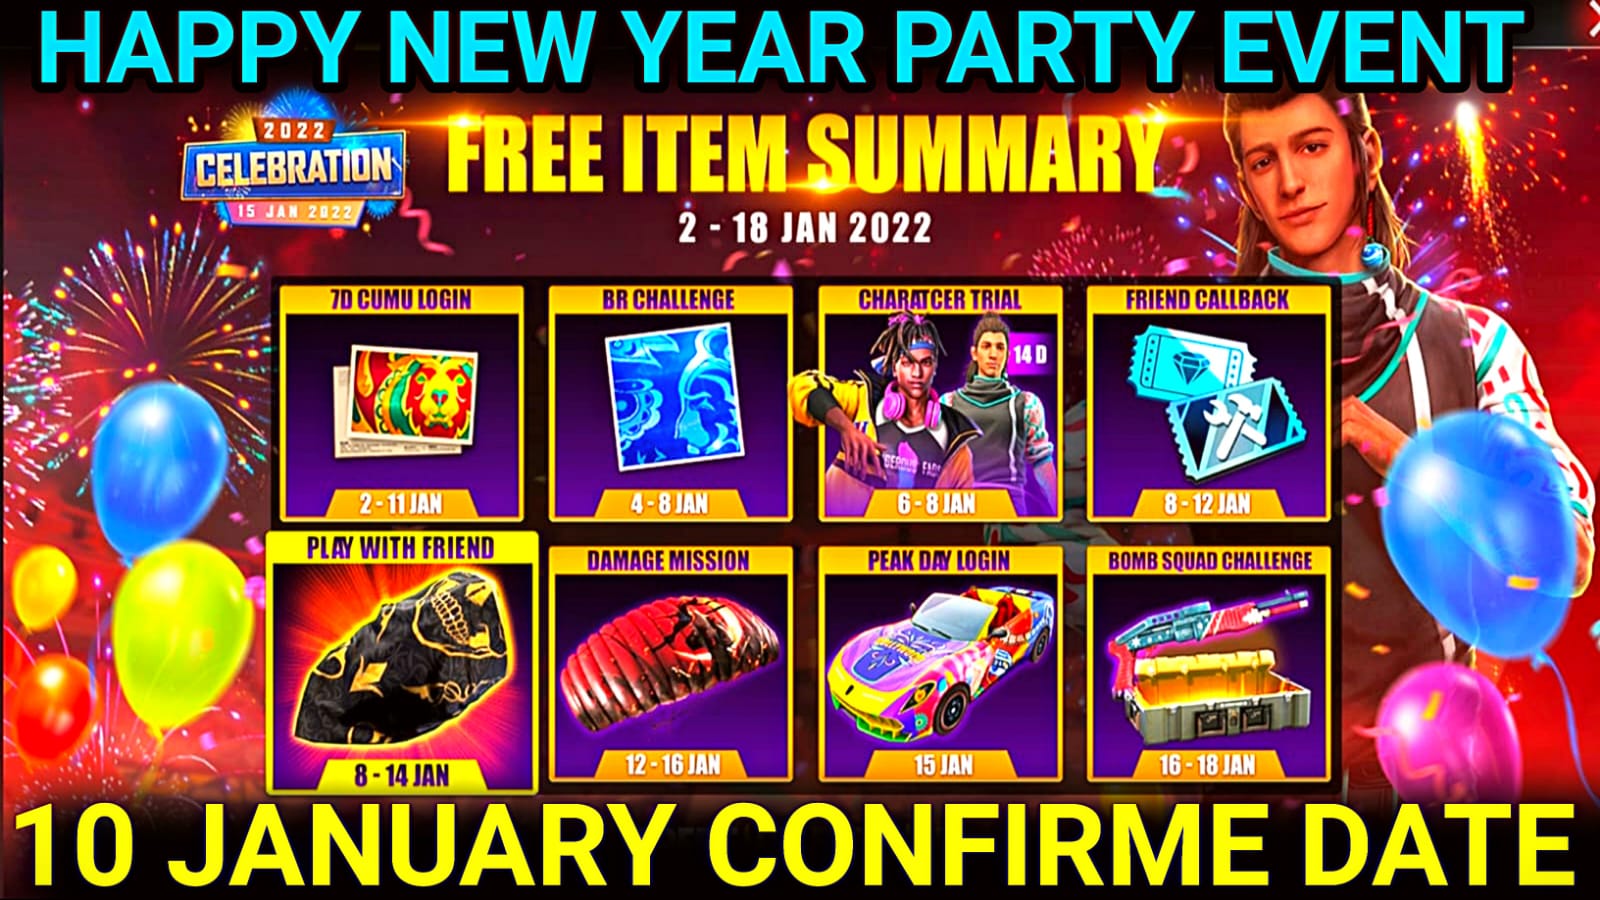 FREE FIRE NEW YEAR EVENT 2022